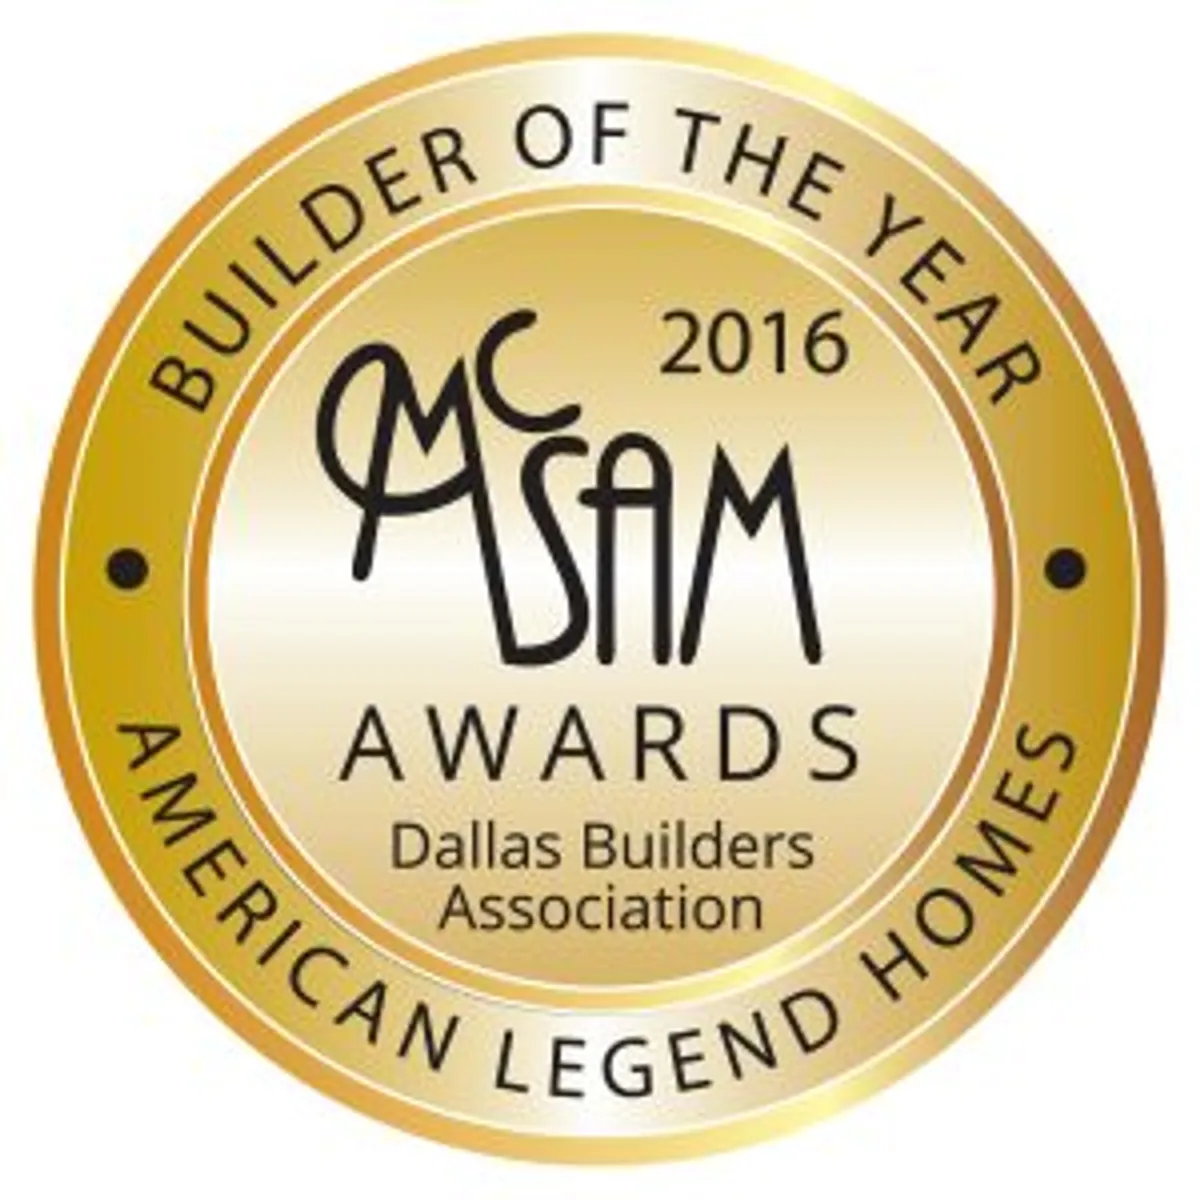 American Legend Wins Coveted 2016 “Builder of the Year” Award